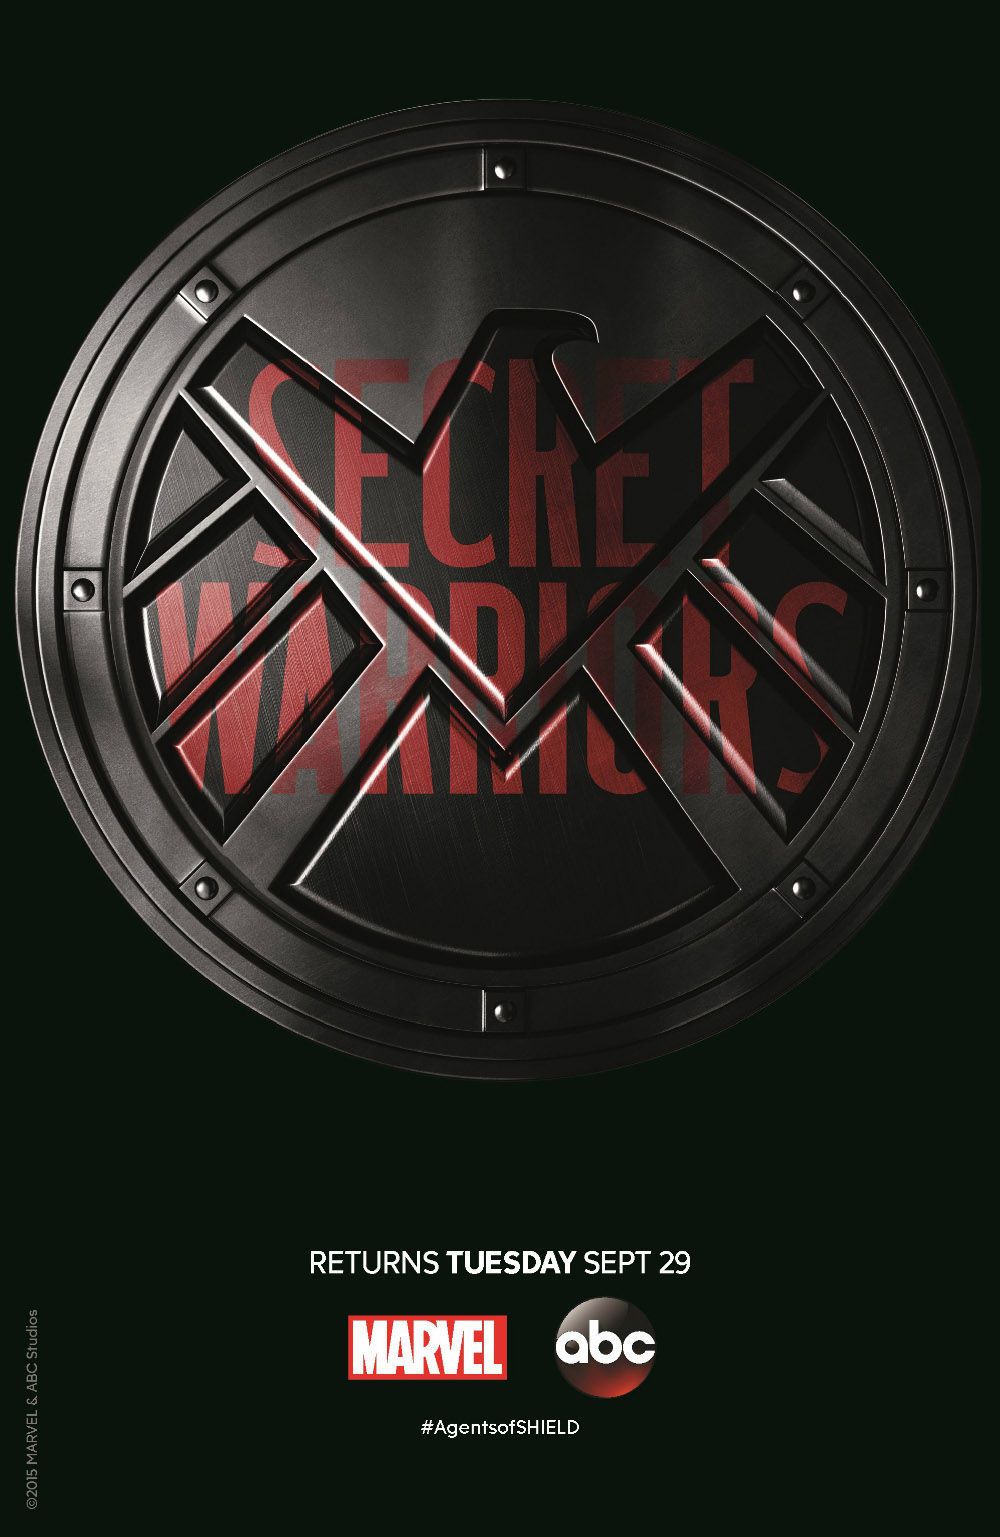 Agents of SHIELD Secret Warriors Poster (High-Res)